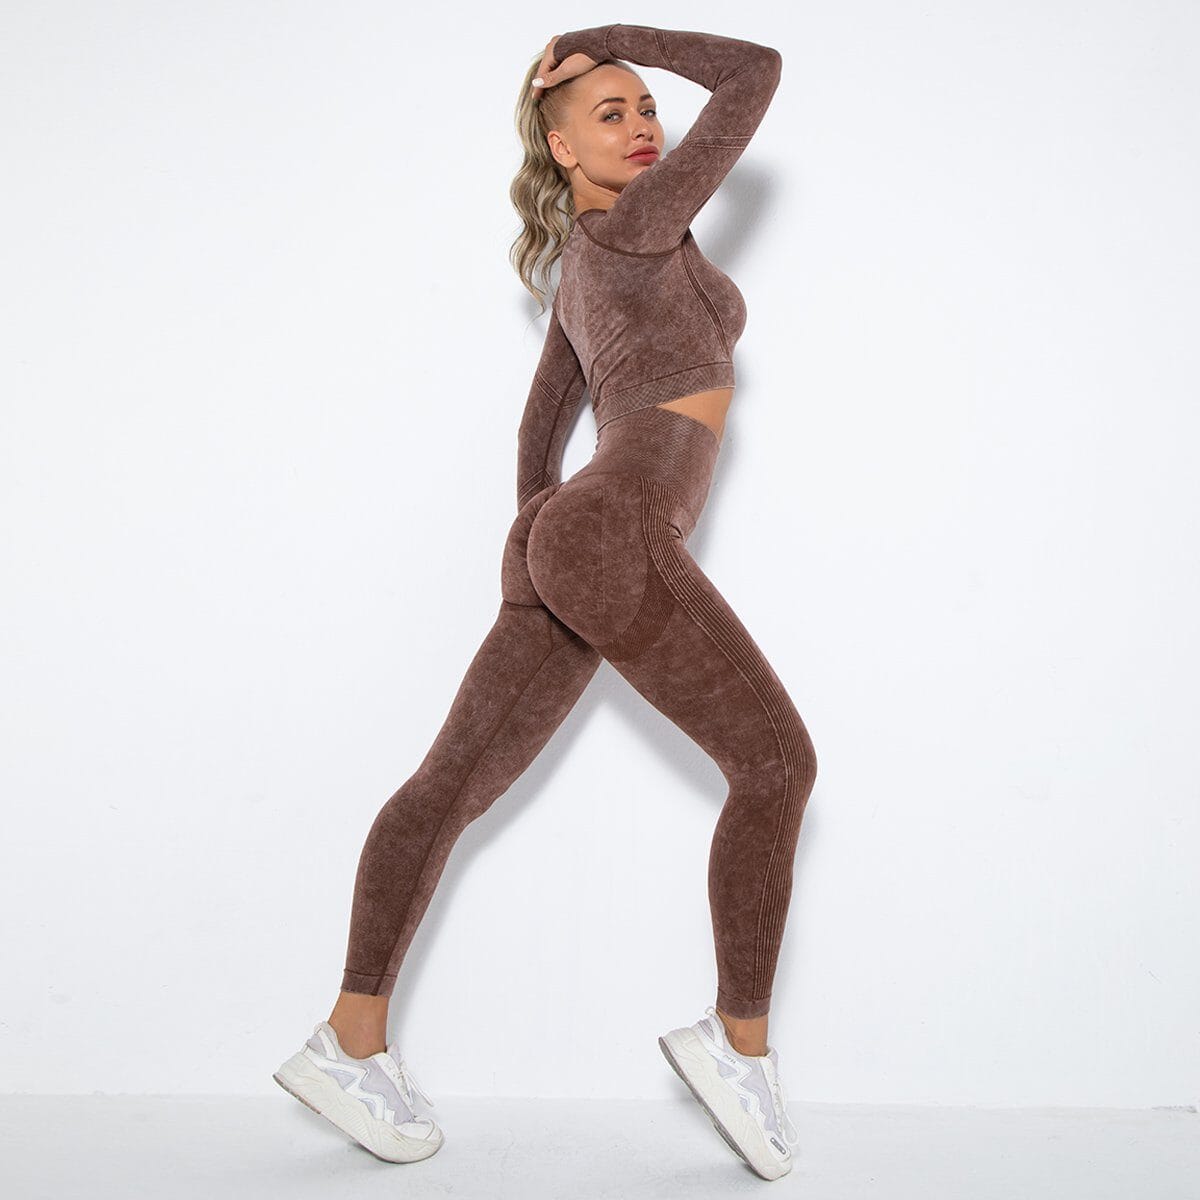 Feather Yoga Set - Leggings + Top Sets Starlethics Brown Quincy S 